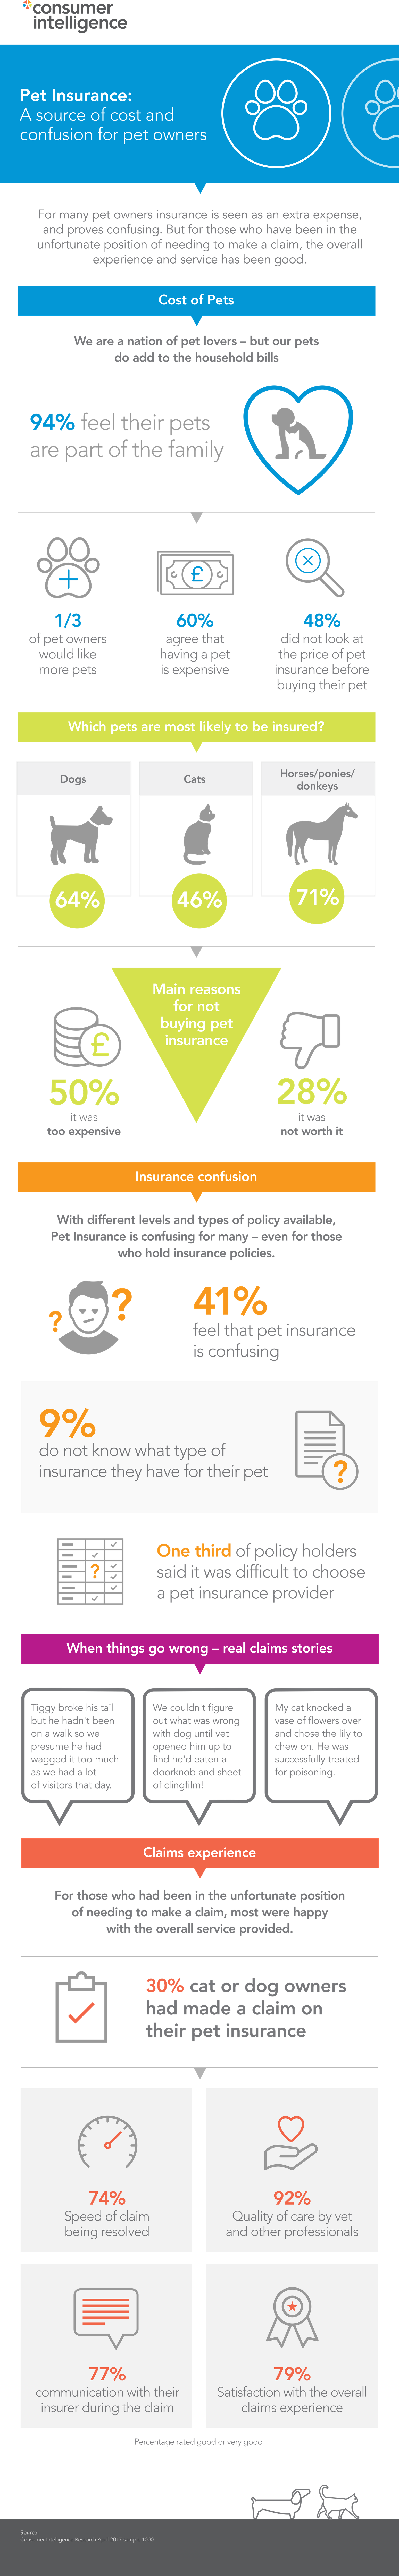 CI_pet_insurance_infographic_PNG.png